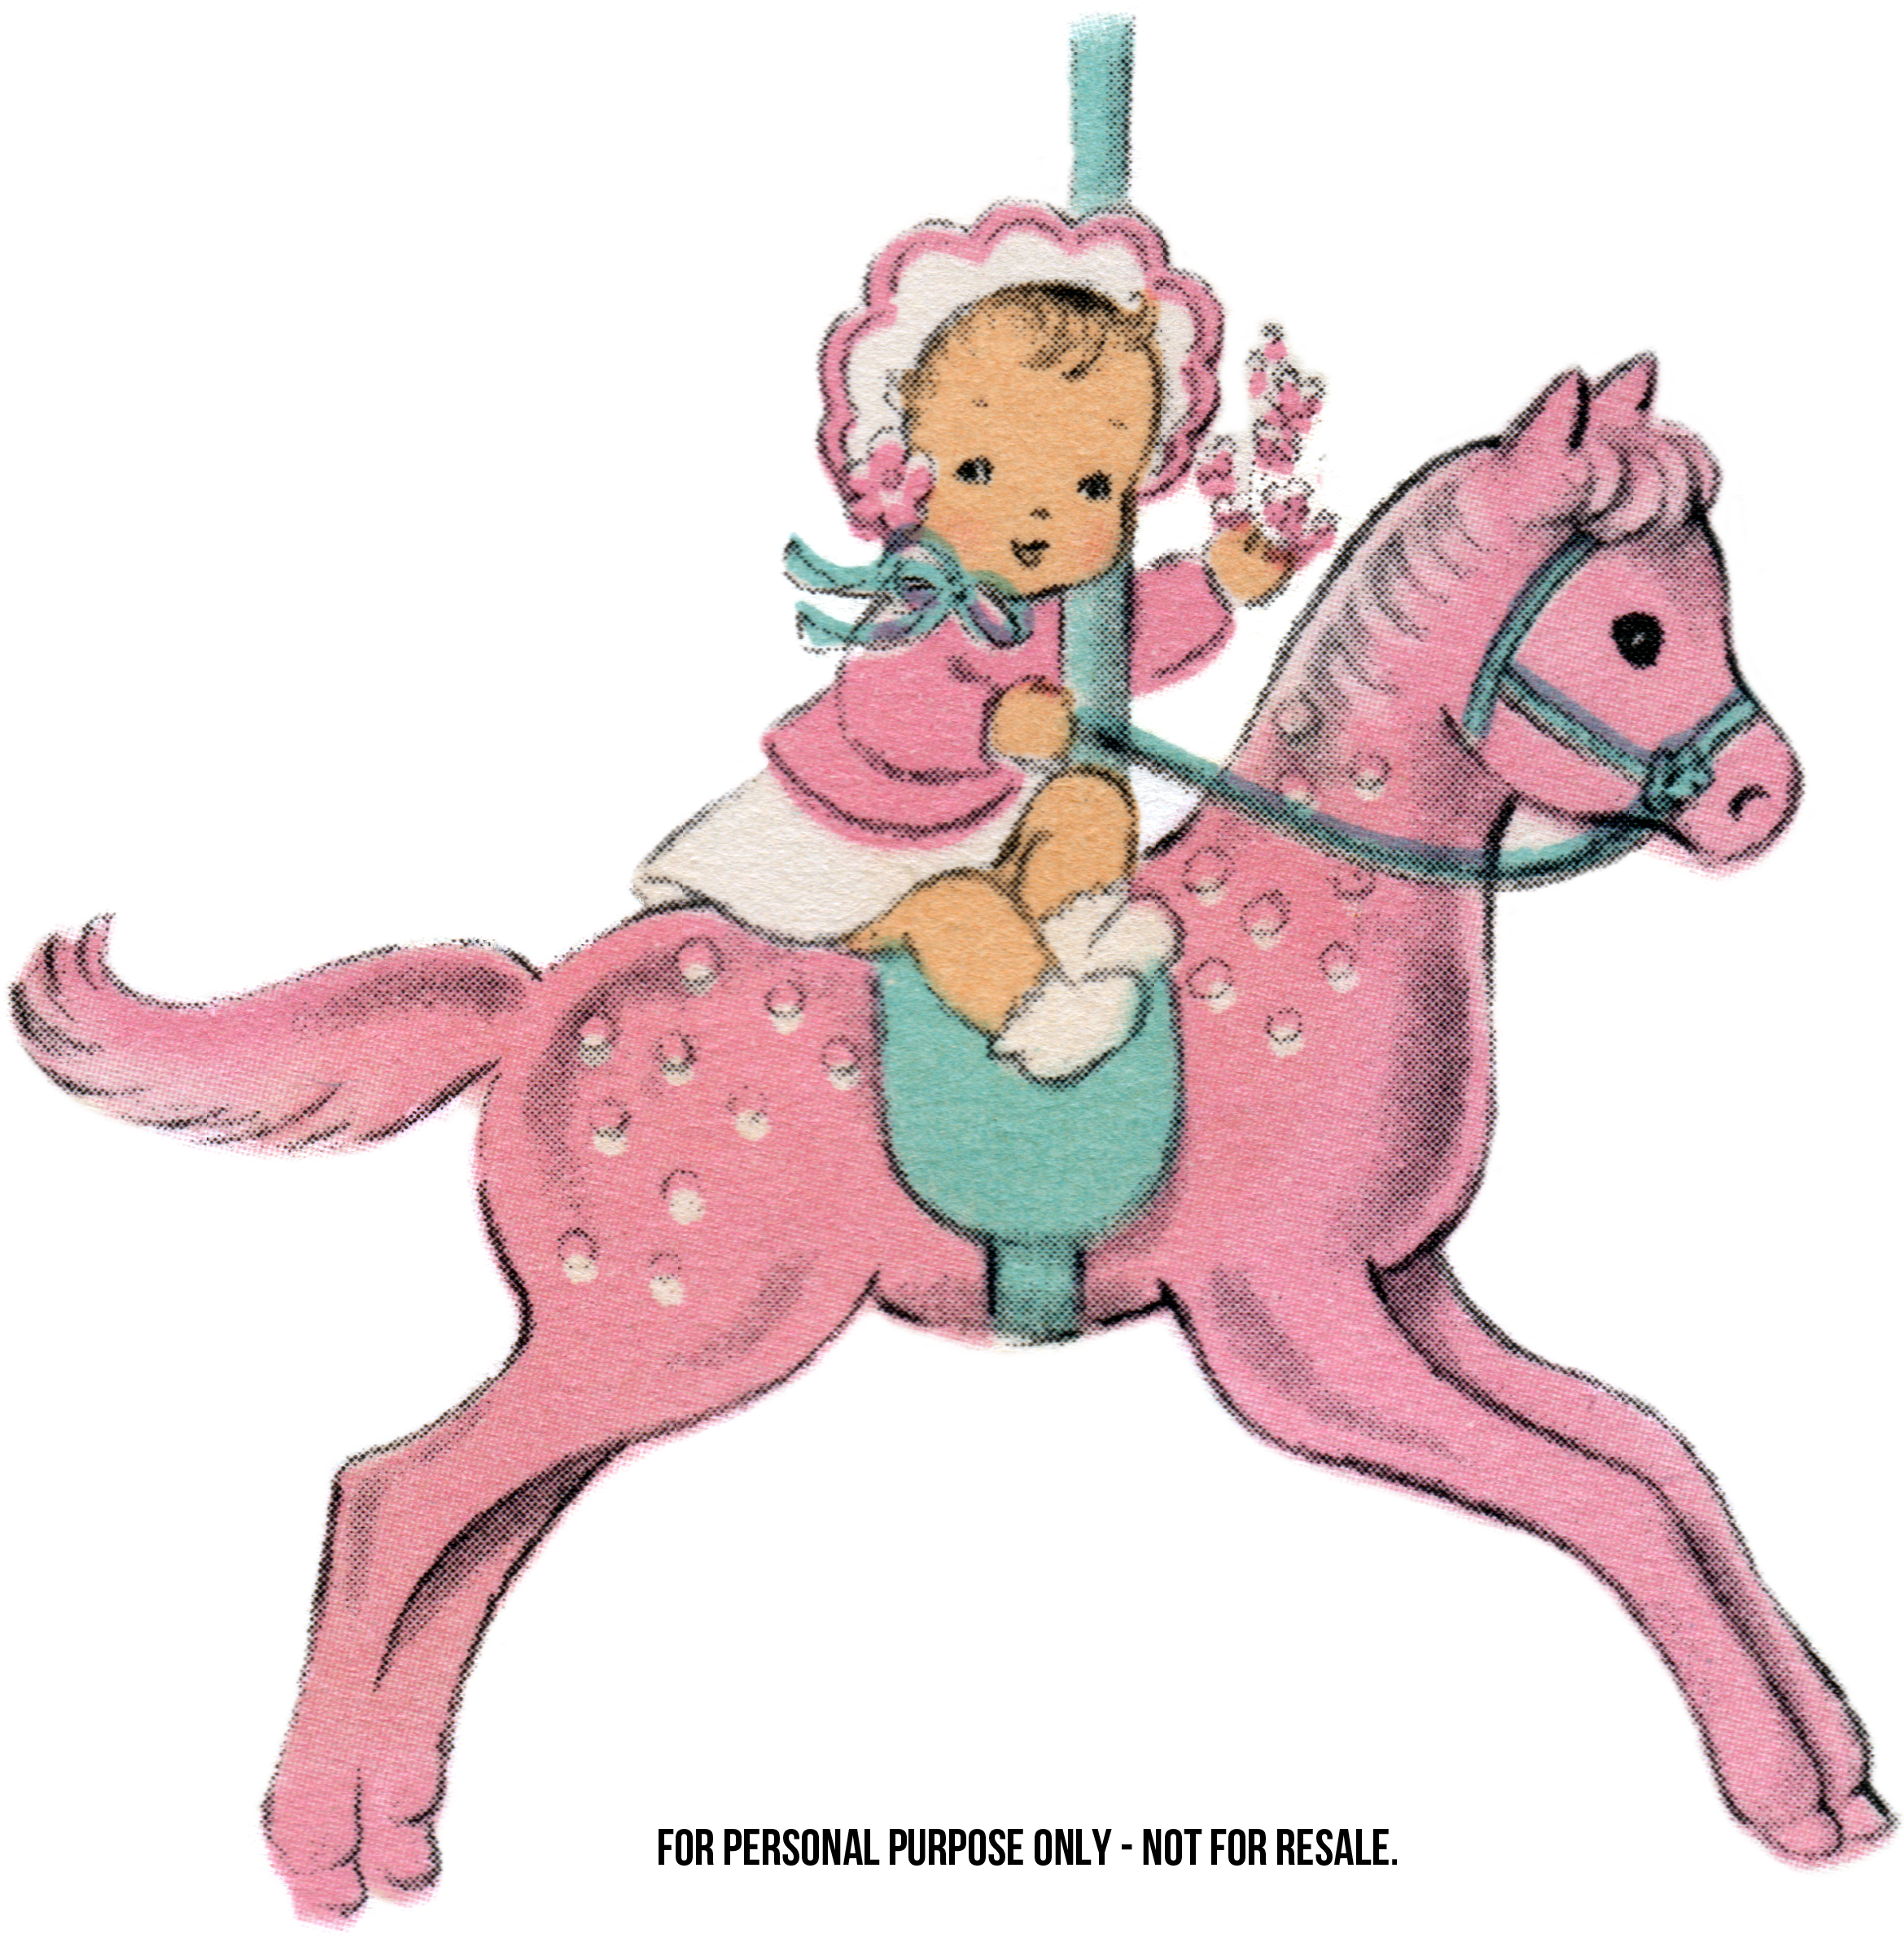 Wednesday clipart pink. Baby clip art pretty